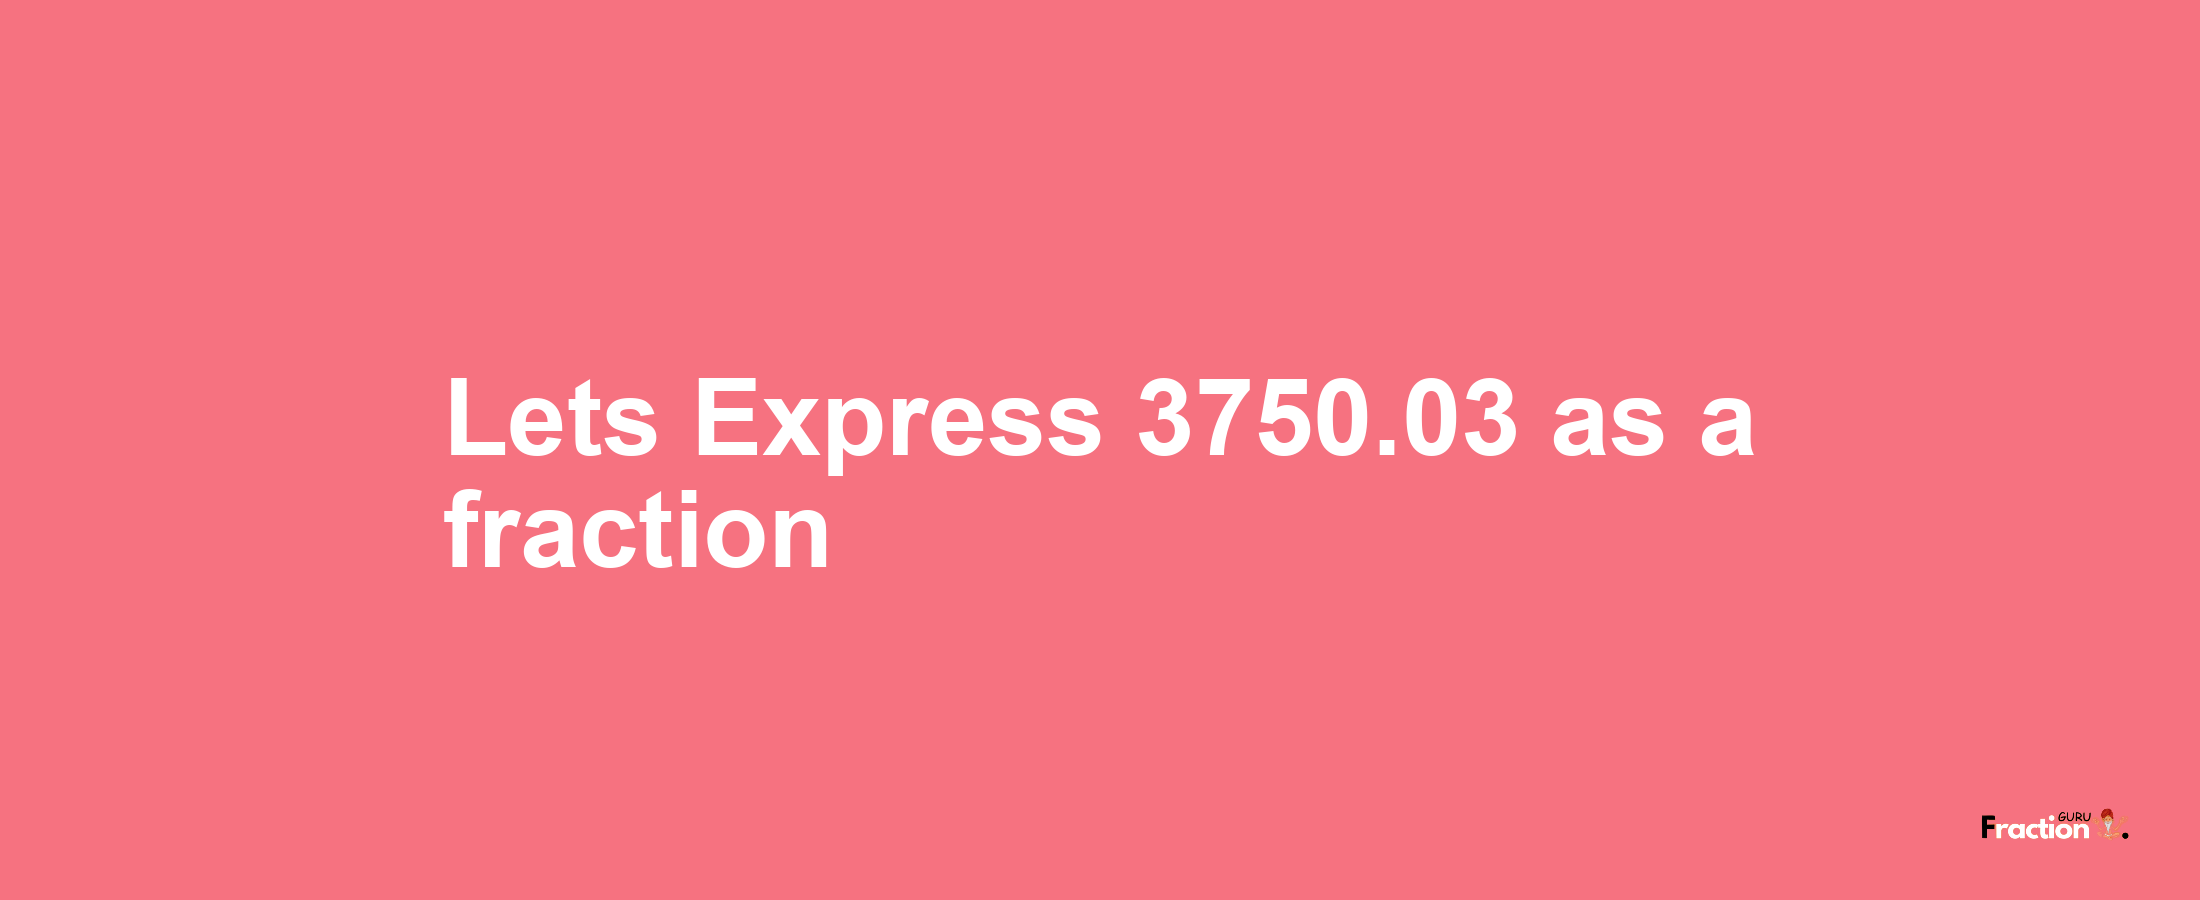 Lets Express 3750.03 as afraction